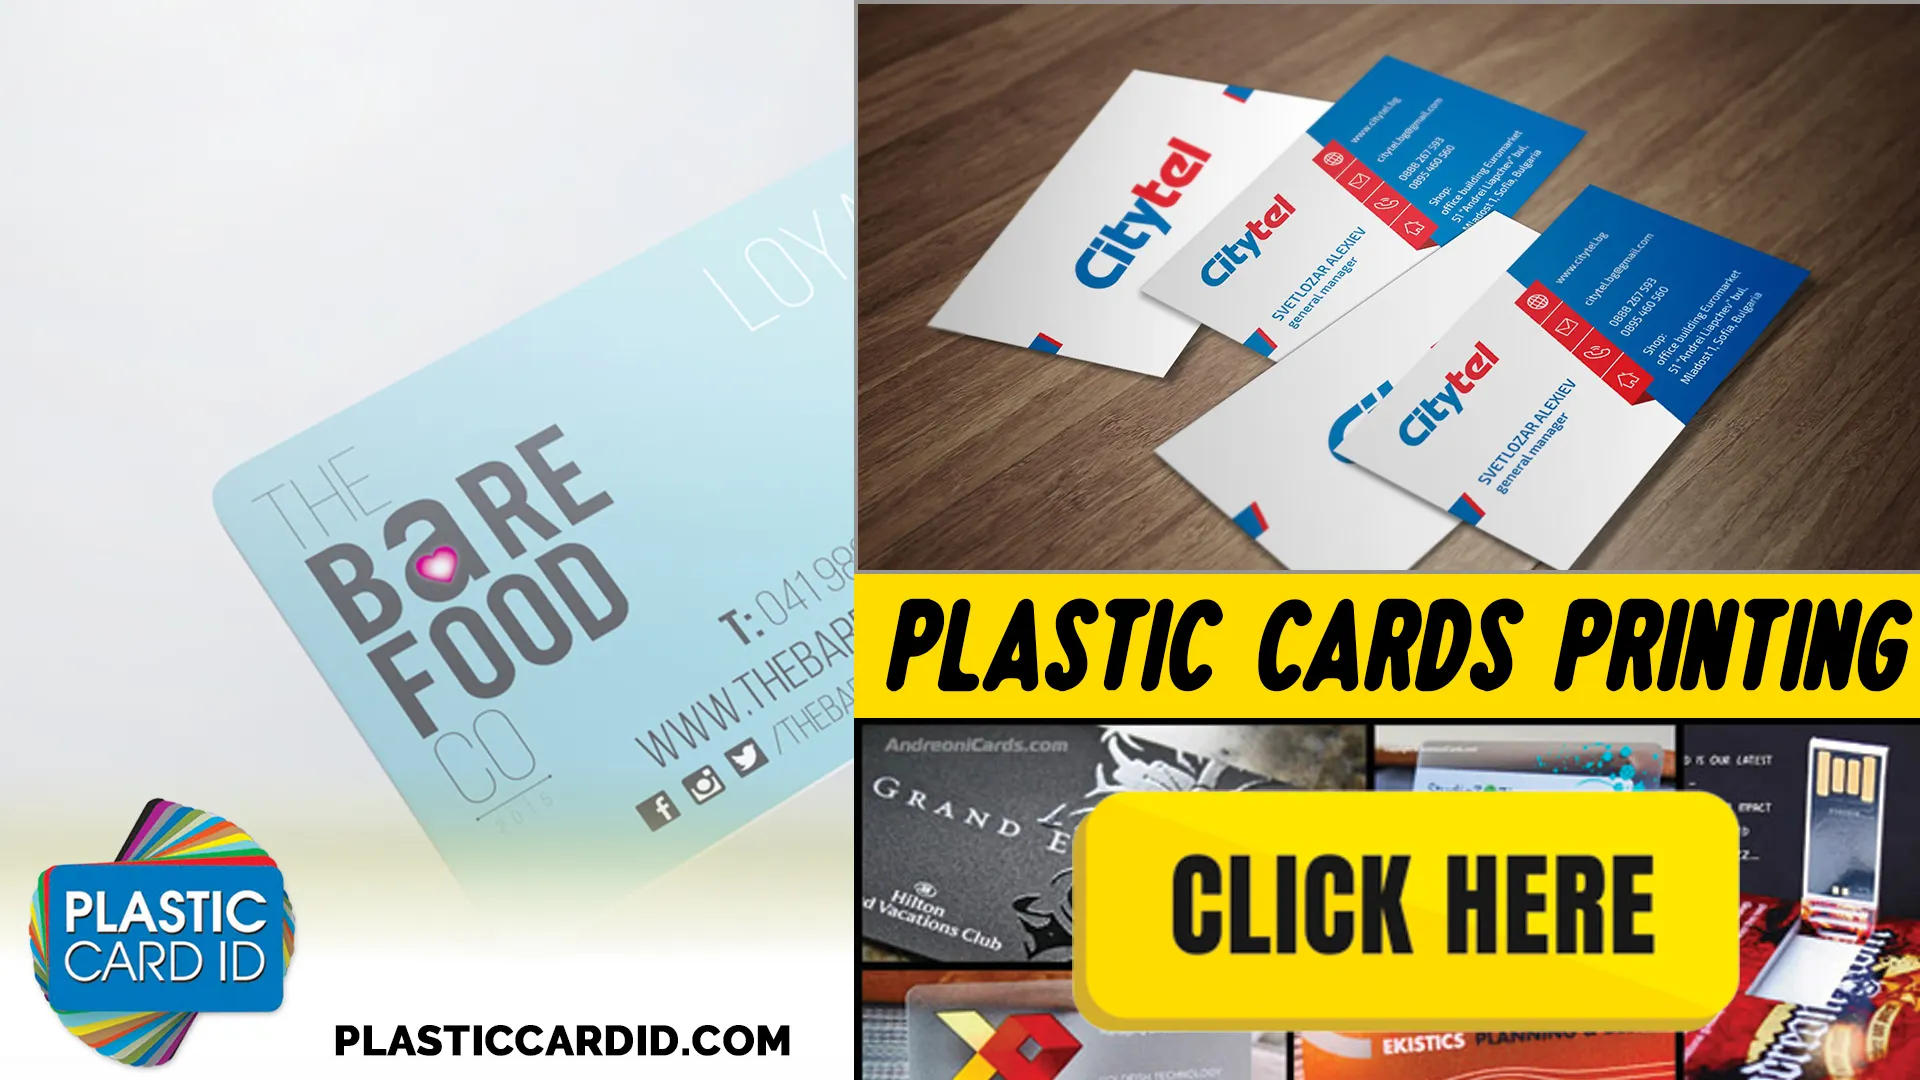 Plastic Card ID




: A Testament to Customer Satisfaction